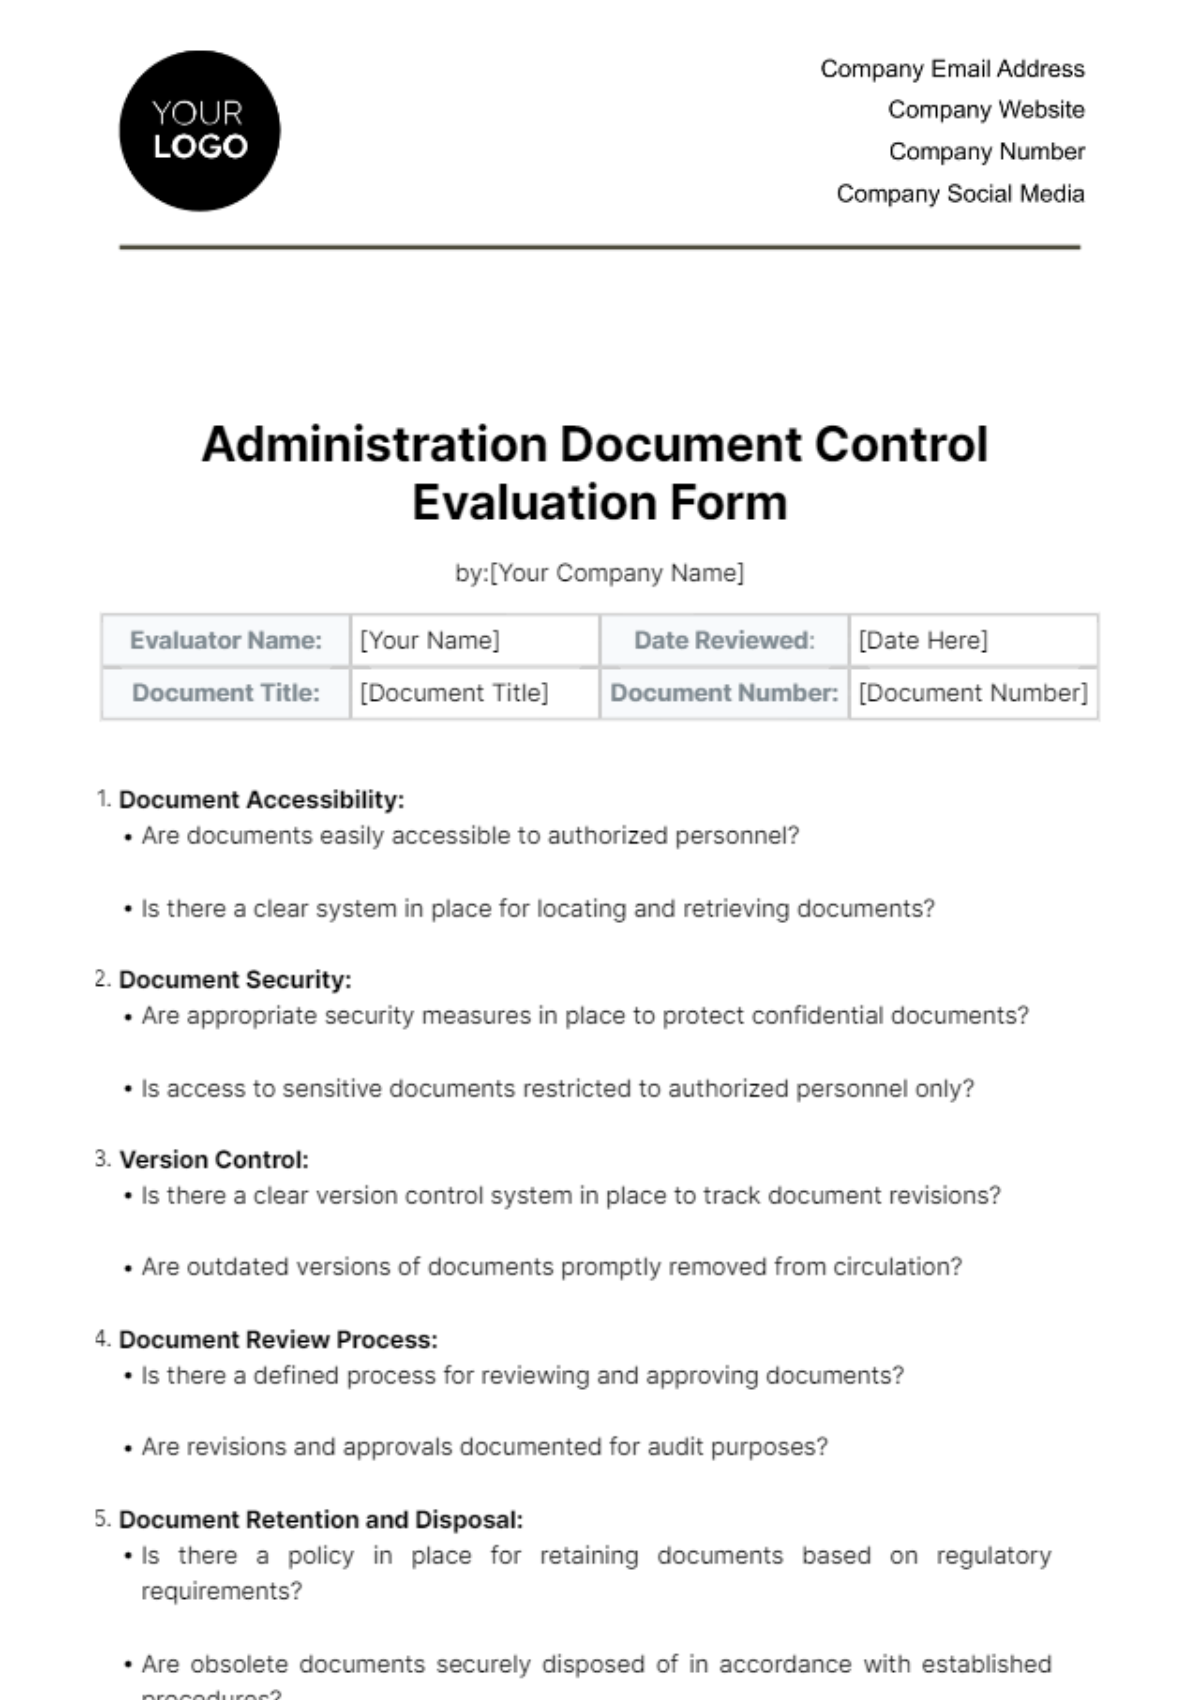 Administration Document Control Evaluation Form Template